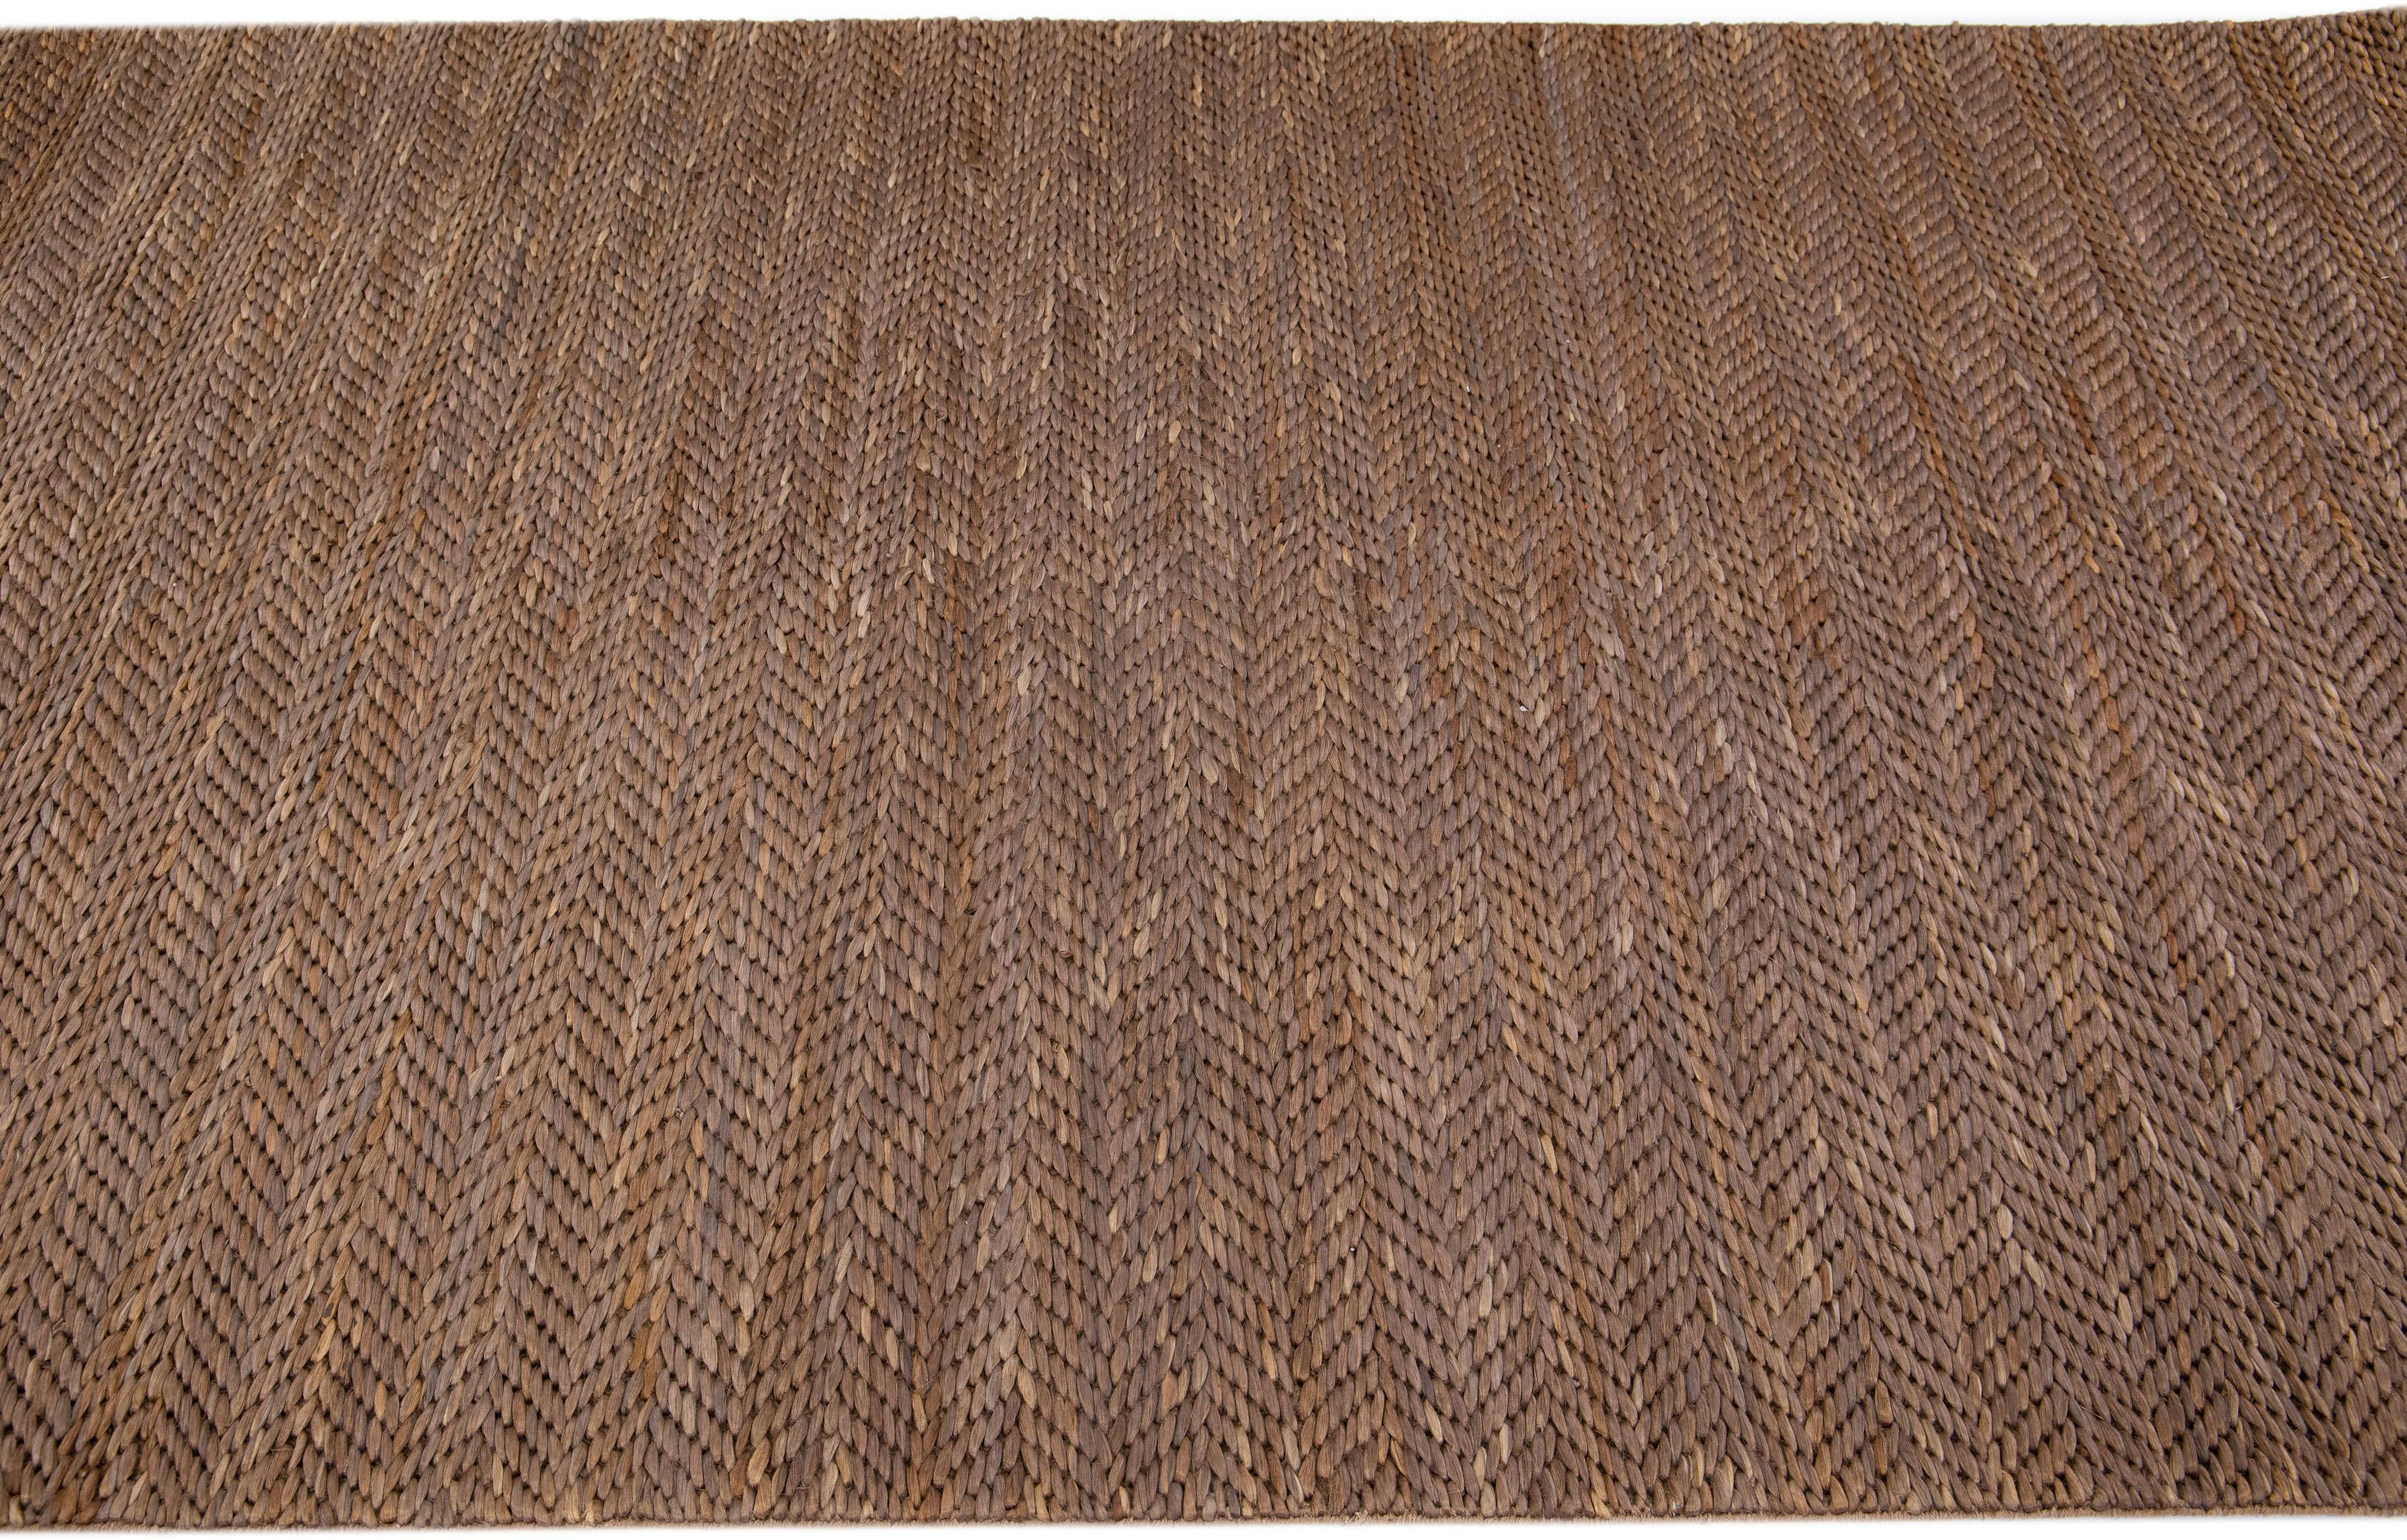 Indian Modern Natural Texture Hand Woven Jute & Cotton Area Rug with Brown Color For Sale